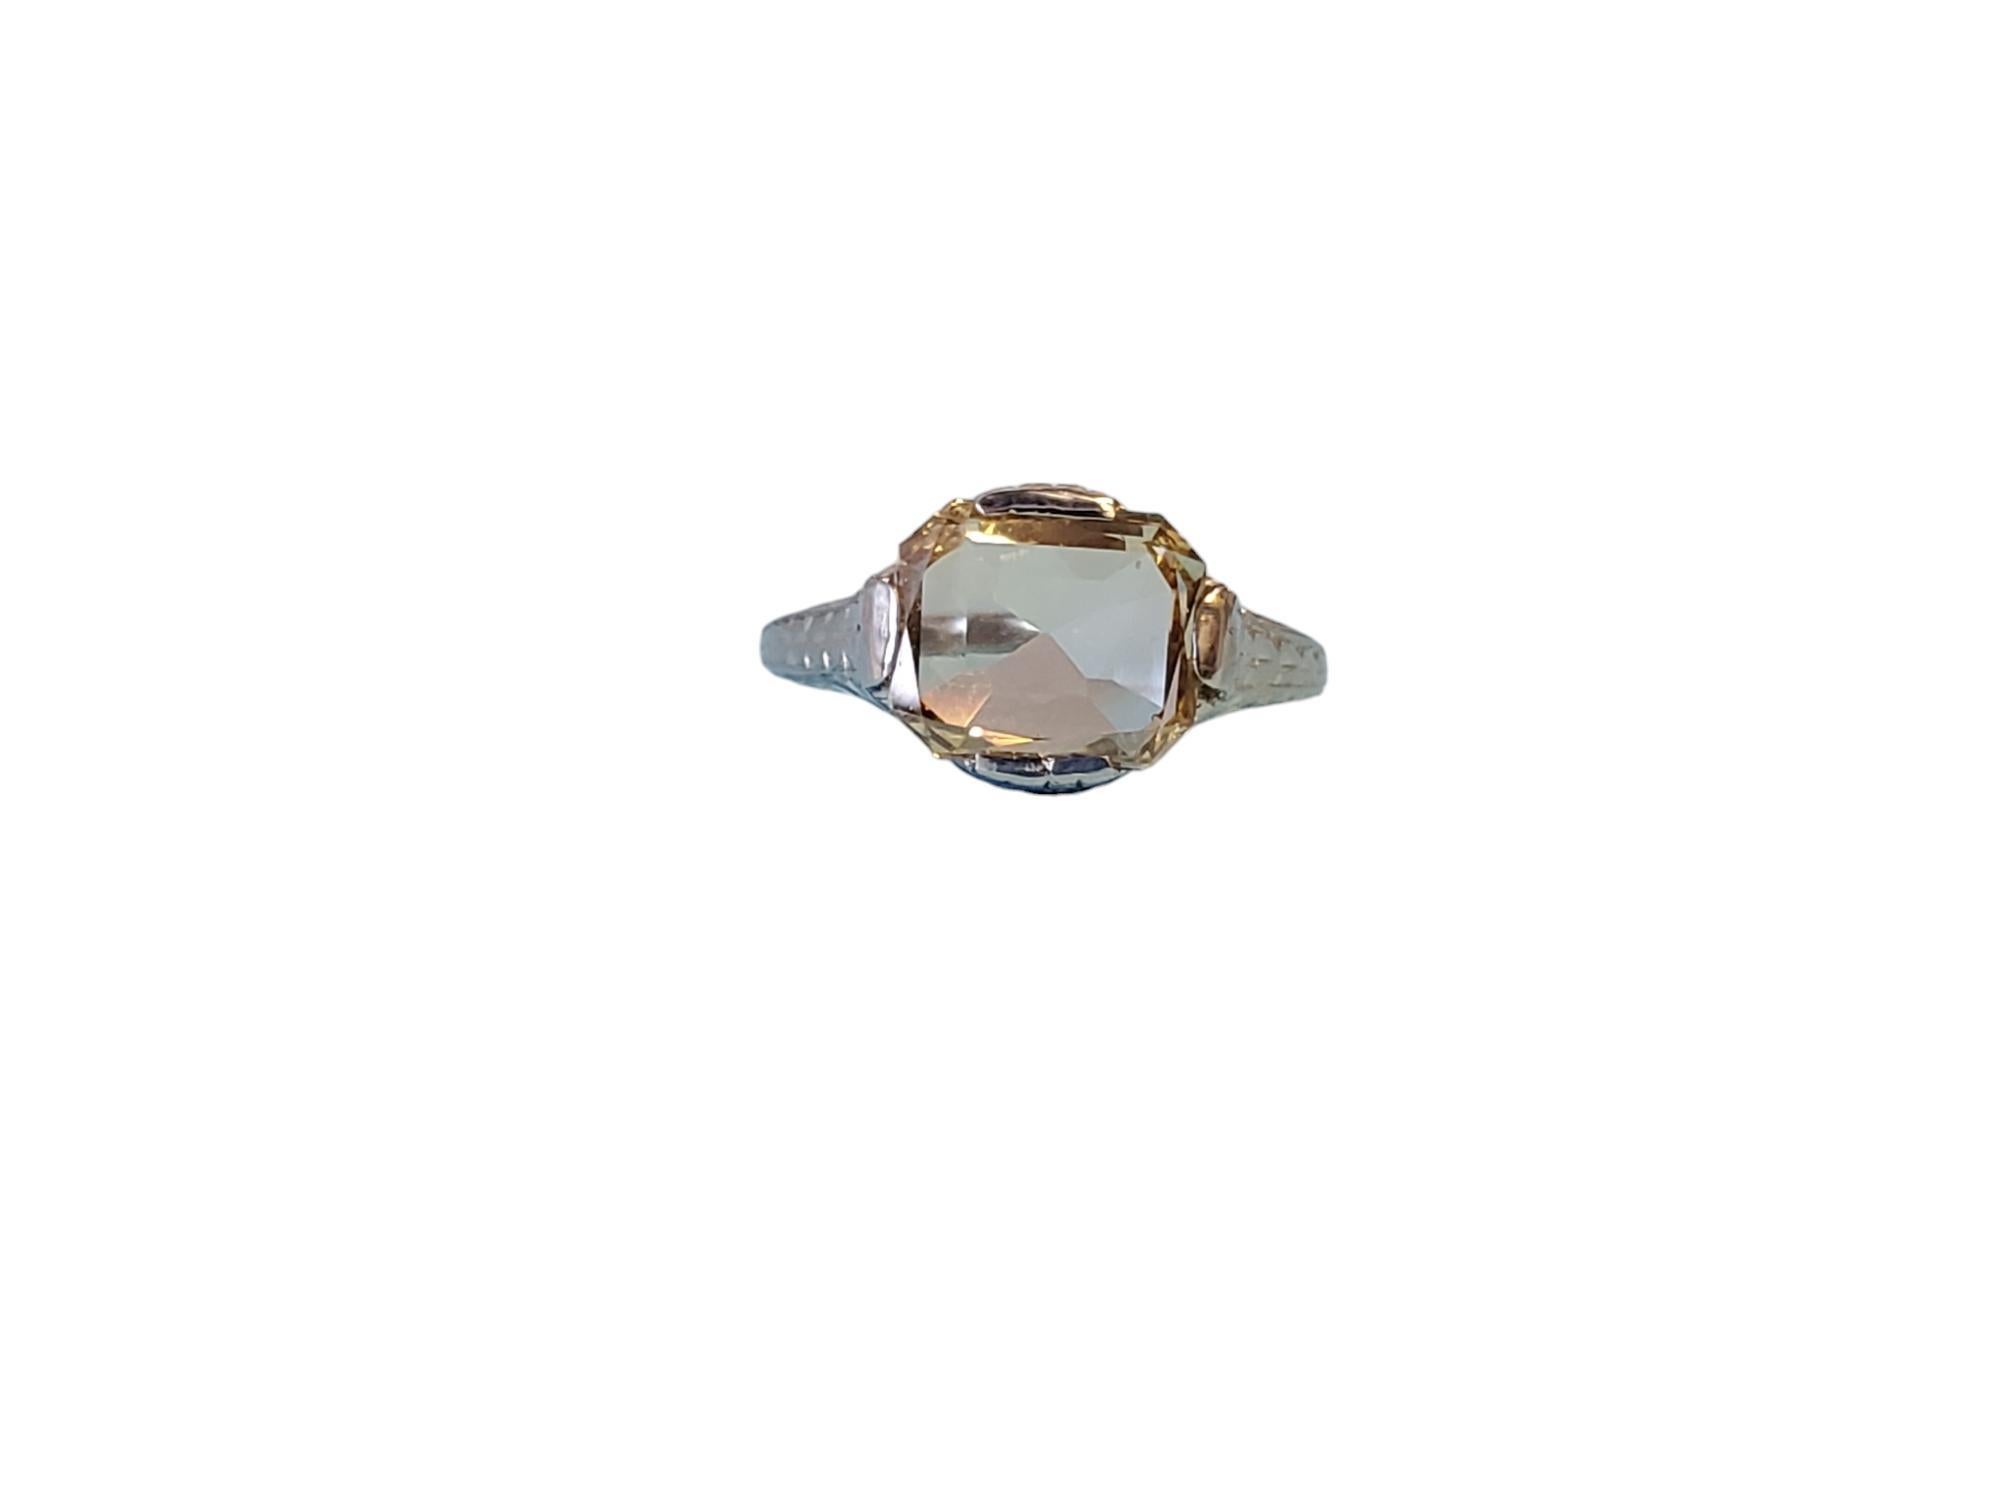 Listed is an 18k art deco 2ct portrait cut style diamond ring. The center stone is a GIA graded Cut Corner Rectangular 2.02ct Fancy Brownish Yellow stone - see report for details. The stone is clear and eye clean, it faces up with a light yellow